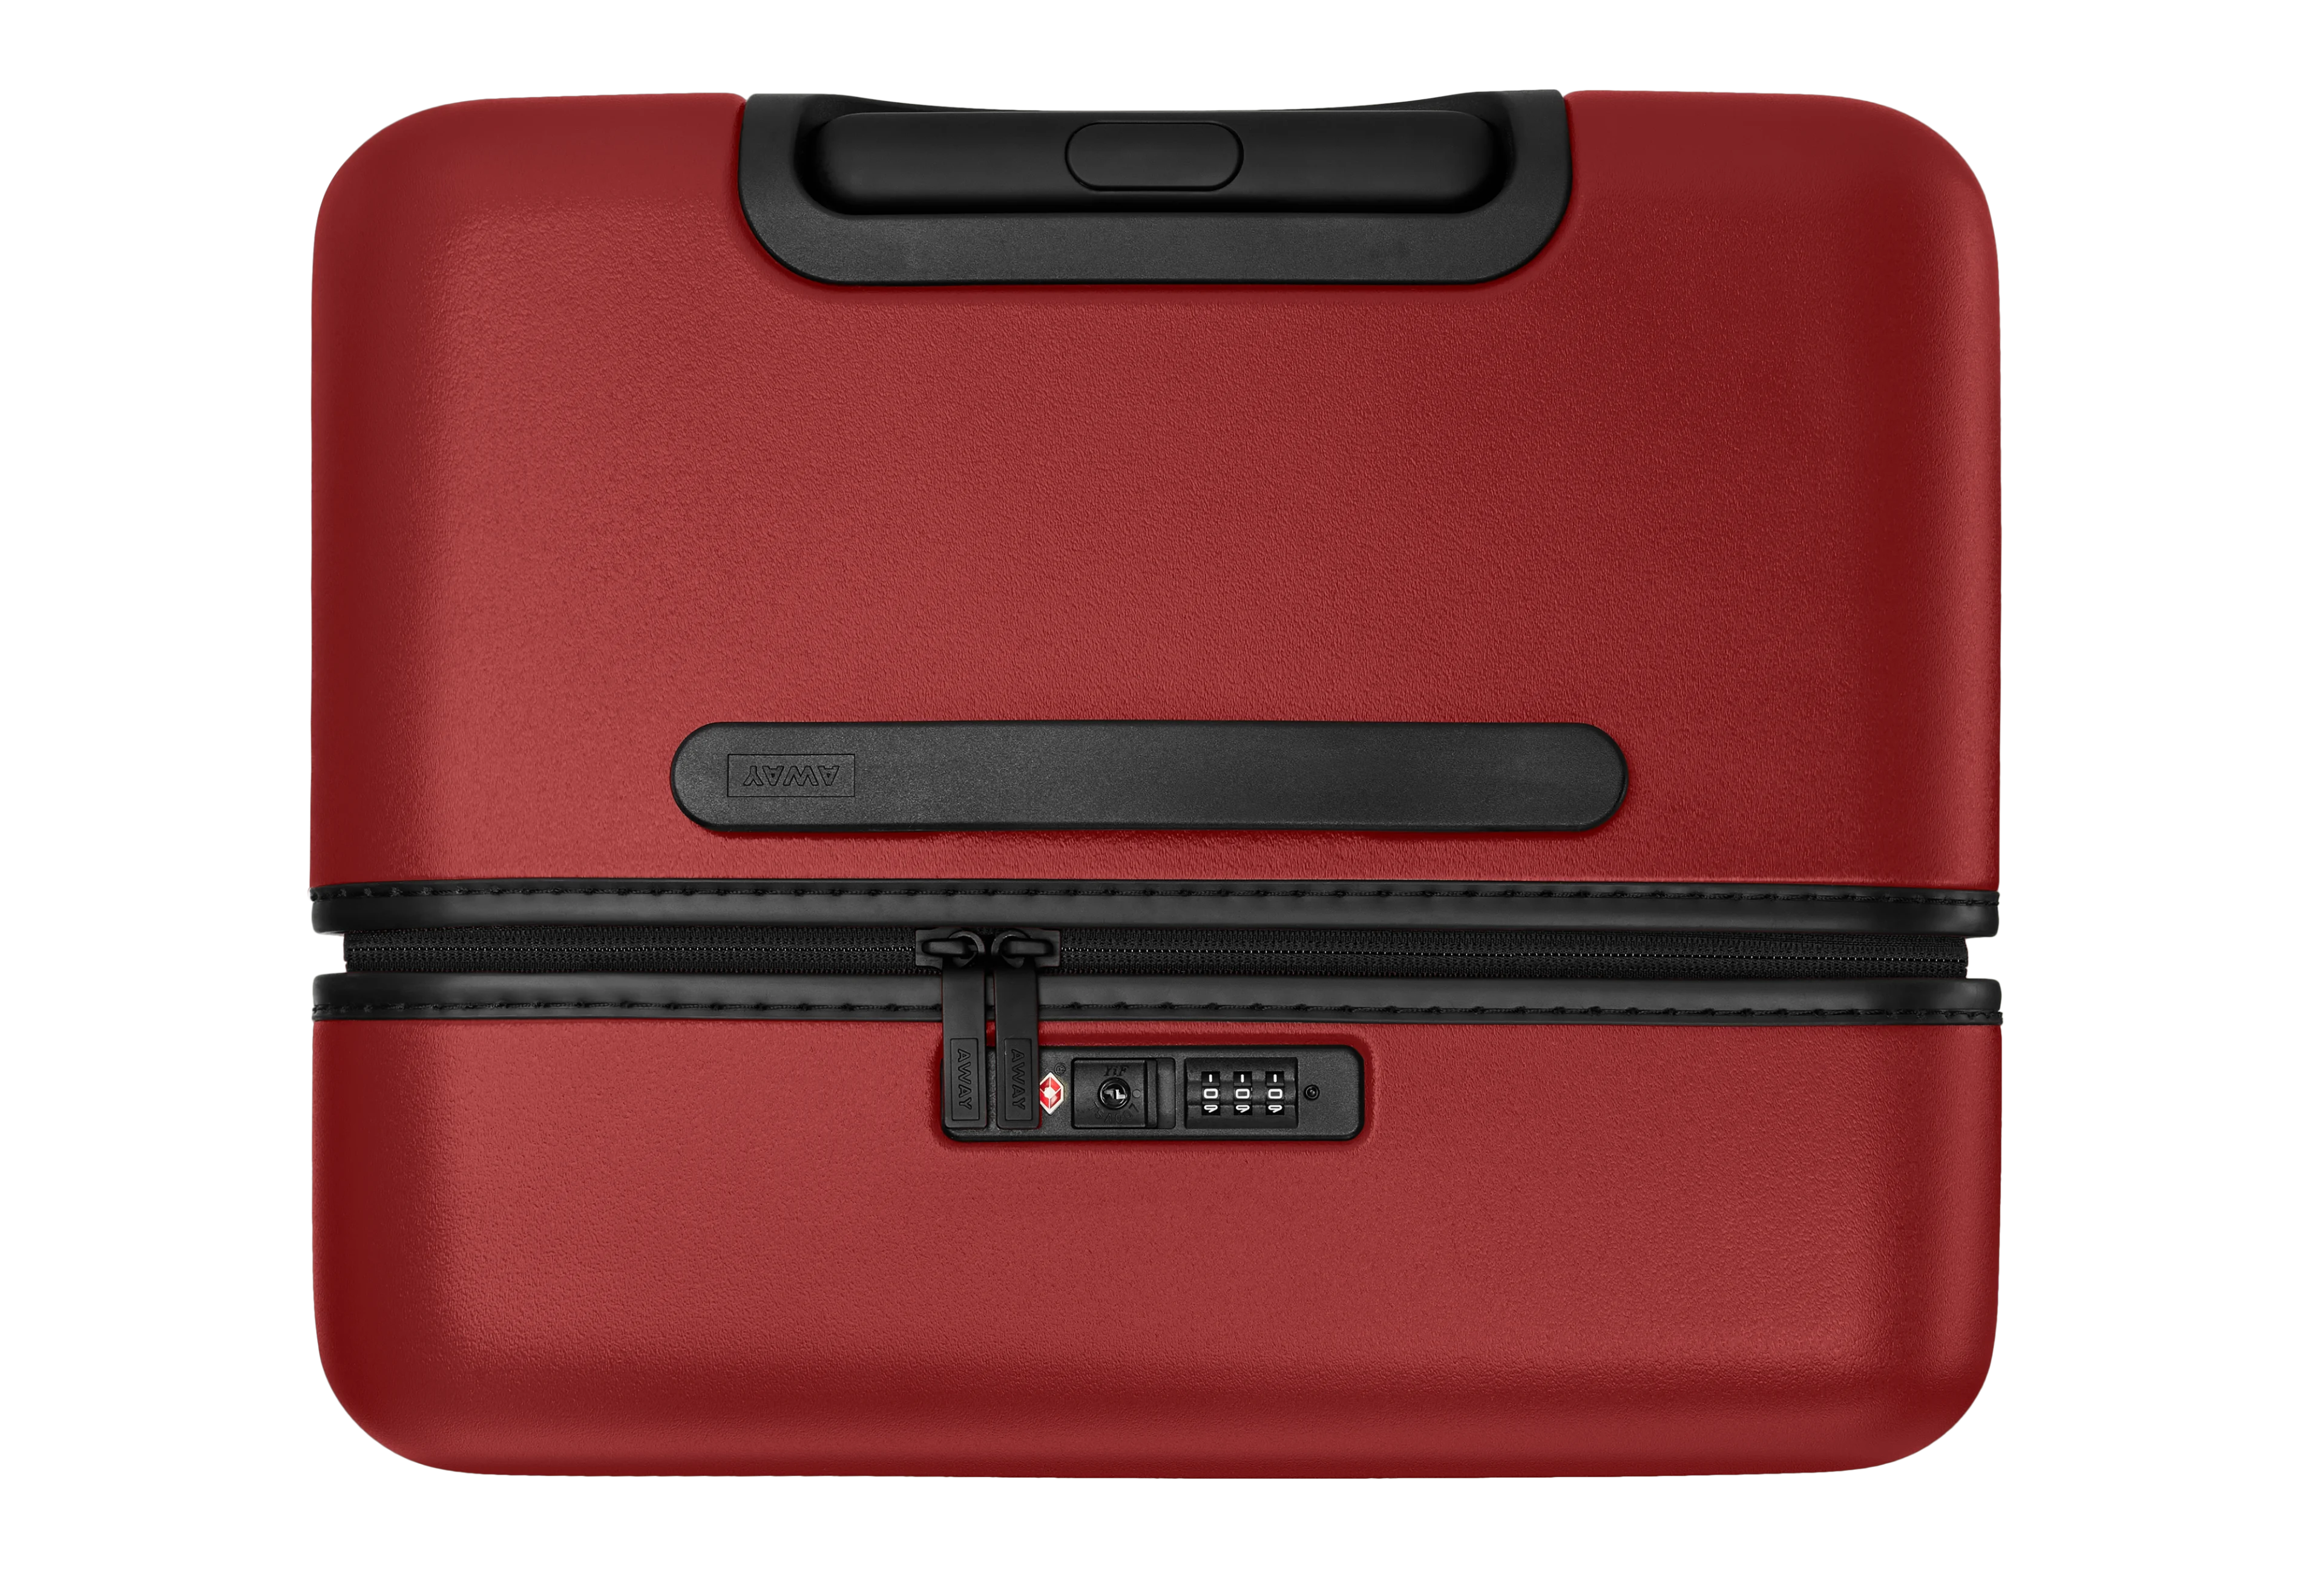 The Trunk in Tango Red